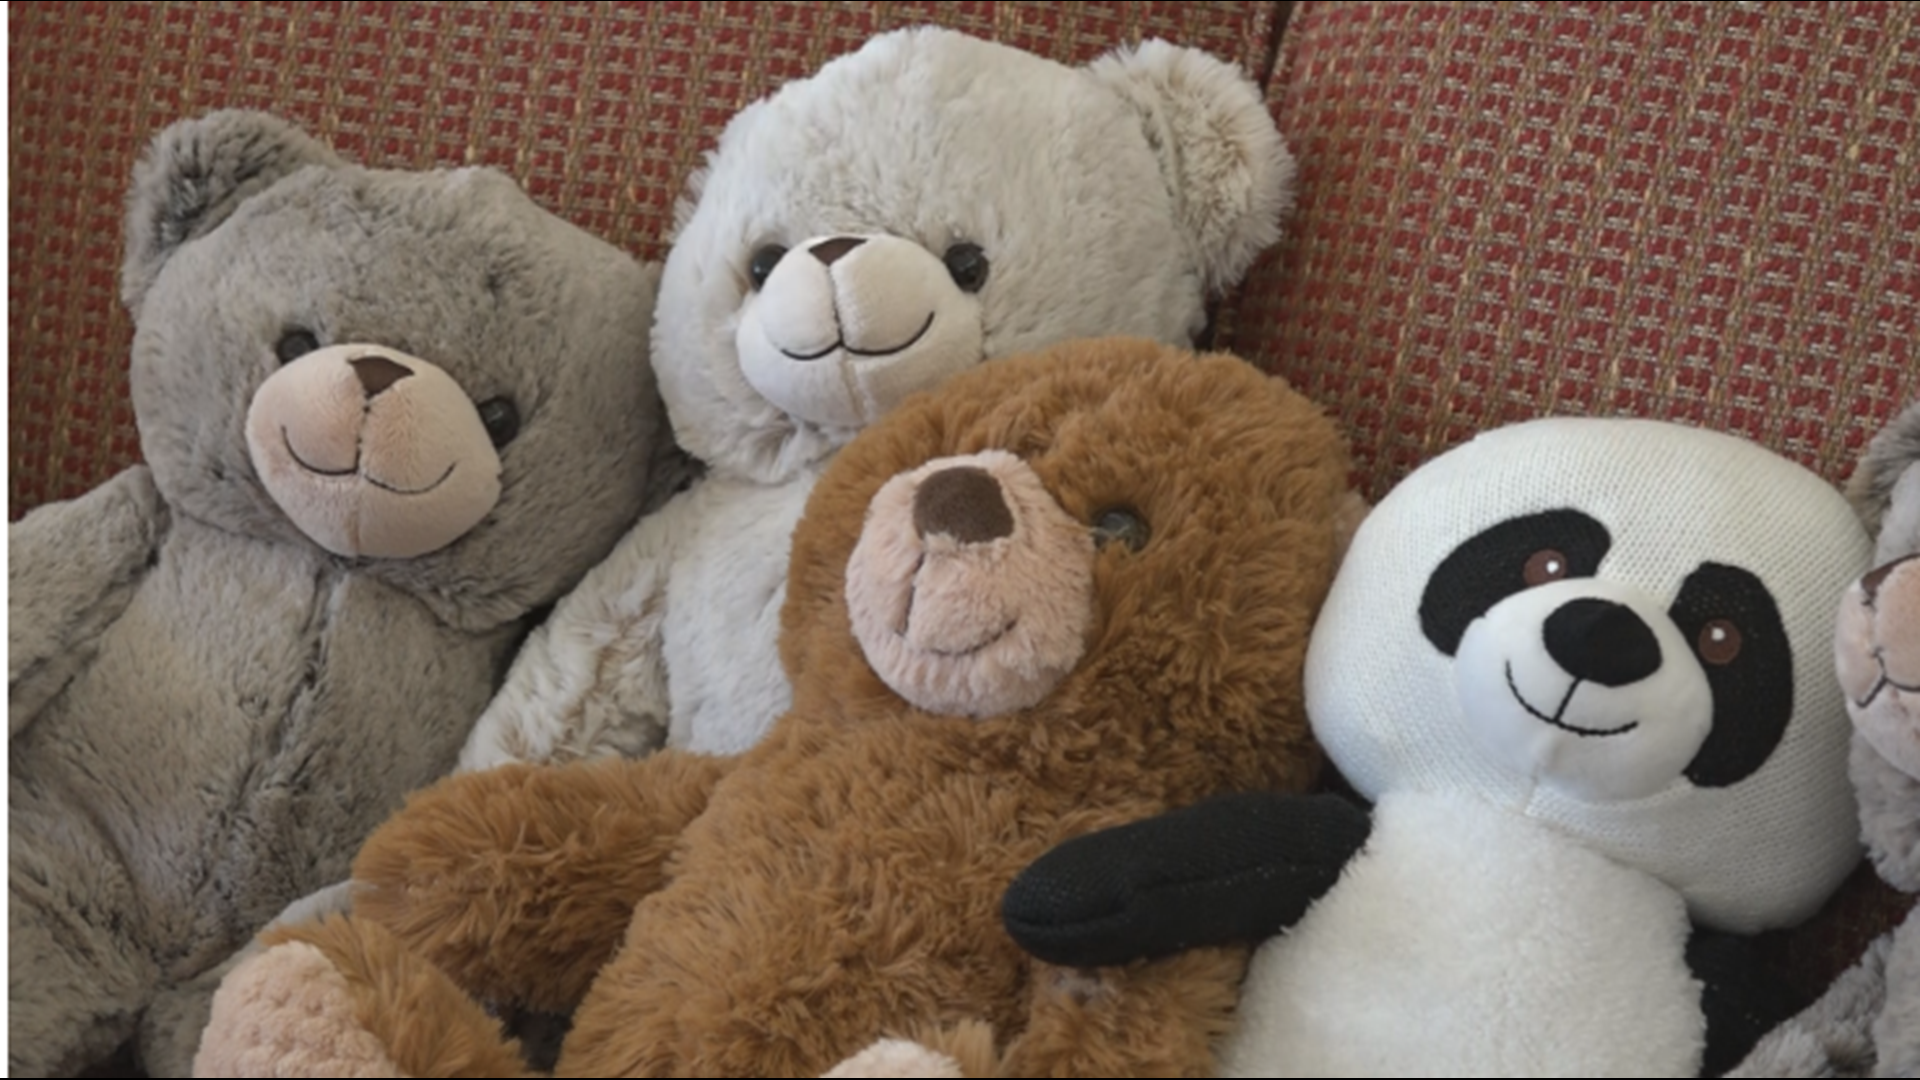 Perry Fire Chief Lee Parker said a simple teddy bear can comfort a child during an emergency